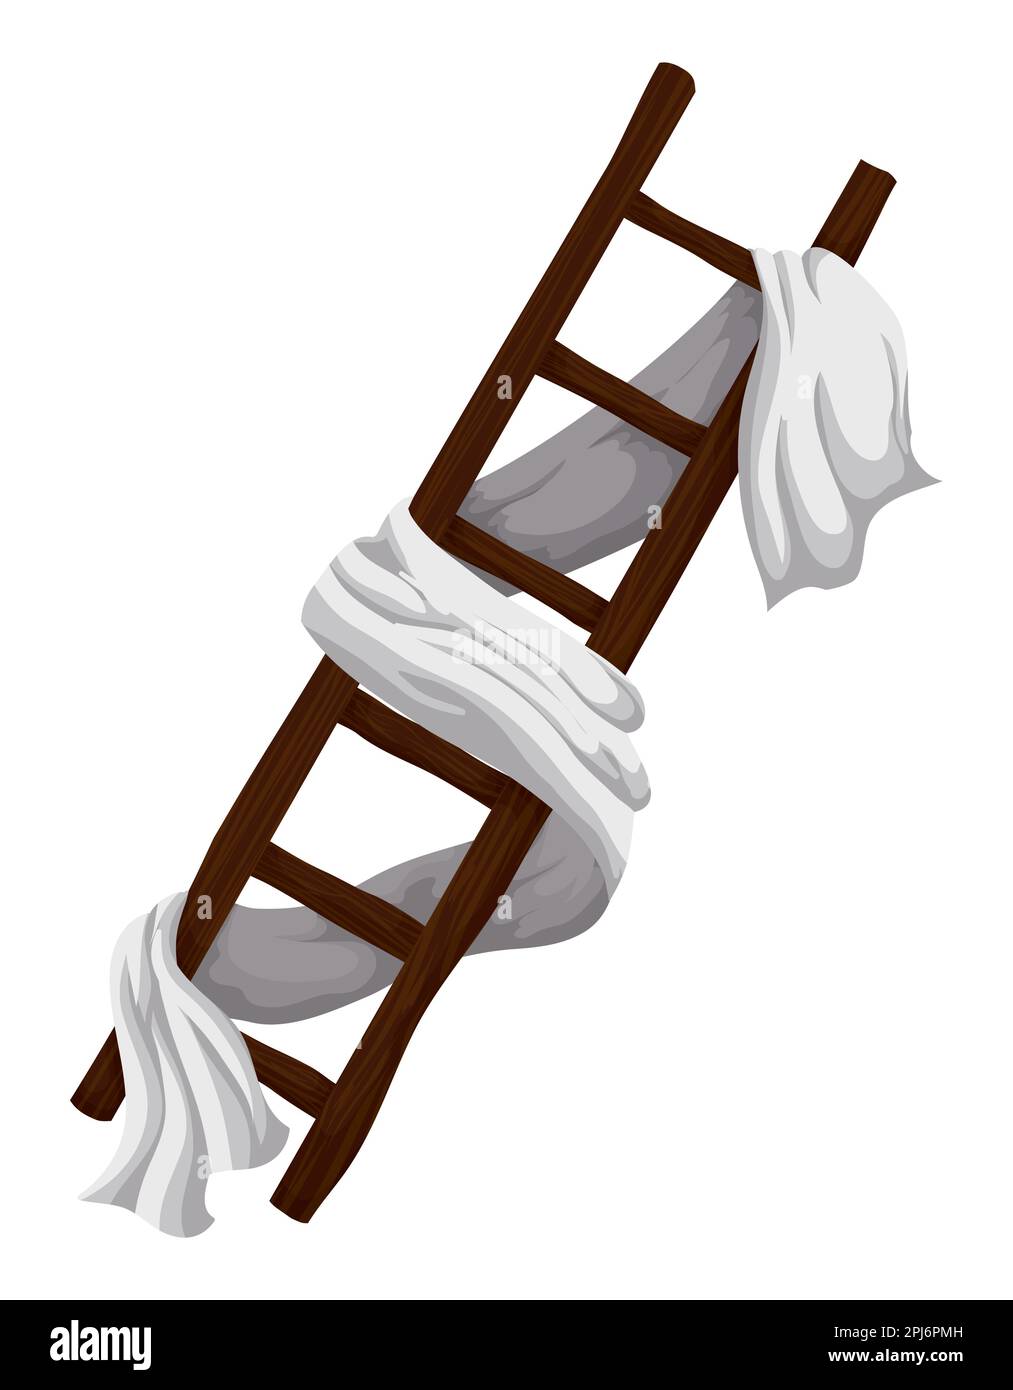 Wooden ladder with white fabric covering it, as a religious symbol of the Descent from the Cross after the crucifixion of Jesus. Stock Vector